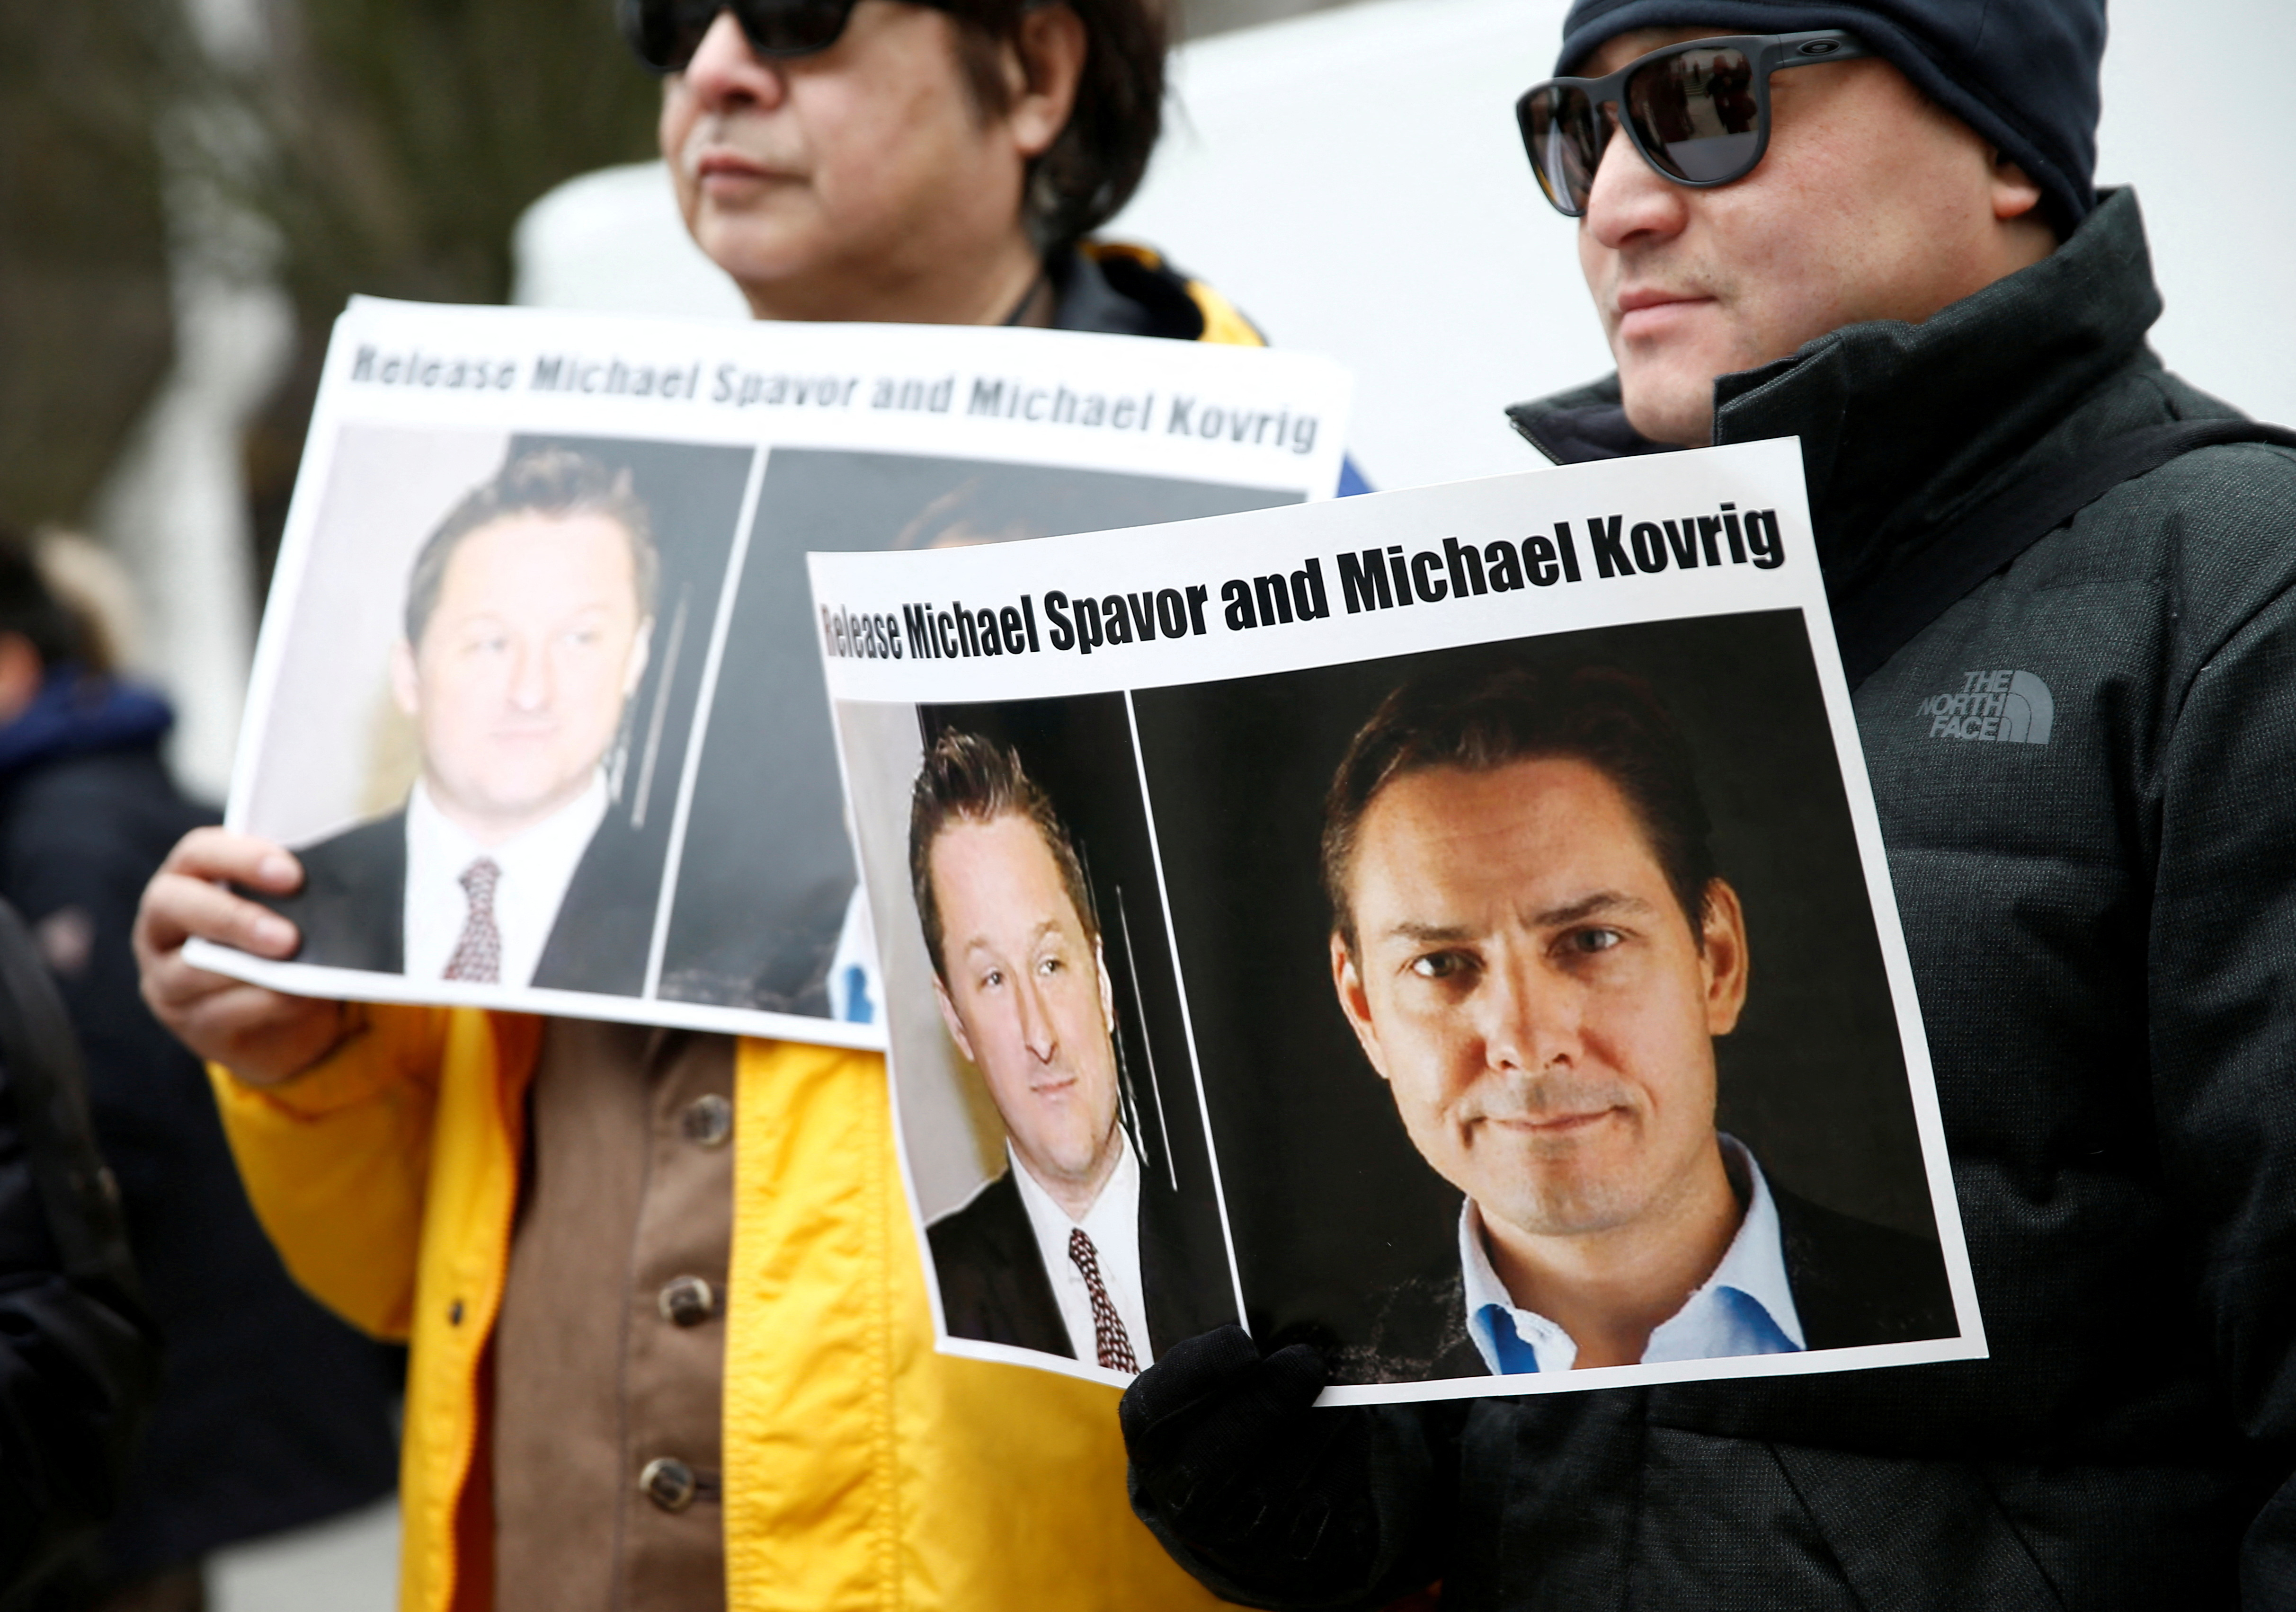 People hold signs calling for China to release Canadian detainees Spavor and Kovrig during an extradition hearing for Huawei Technologies Chief Financial Officer Meng Wanzhou at the B.C. Supreme Court in Vancouver